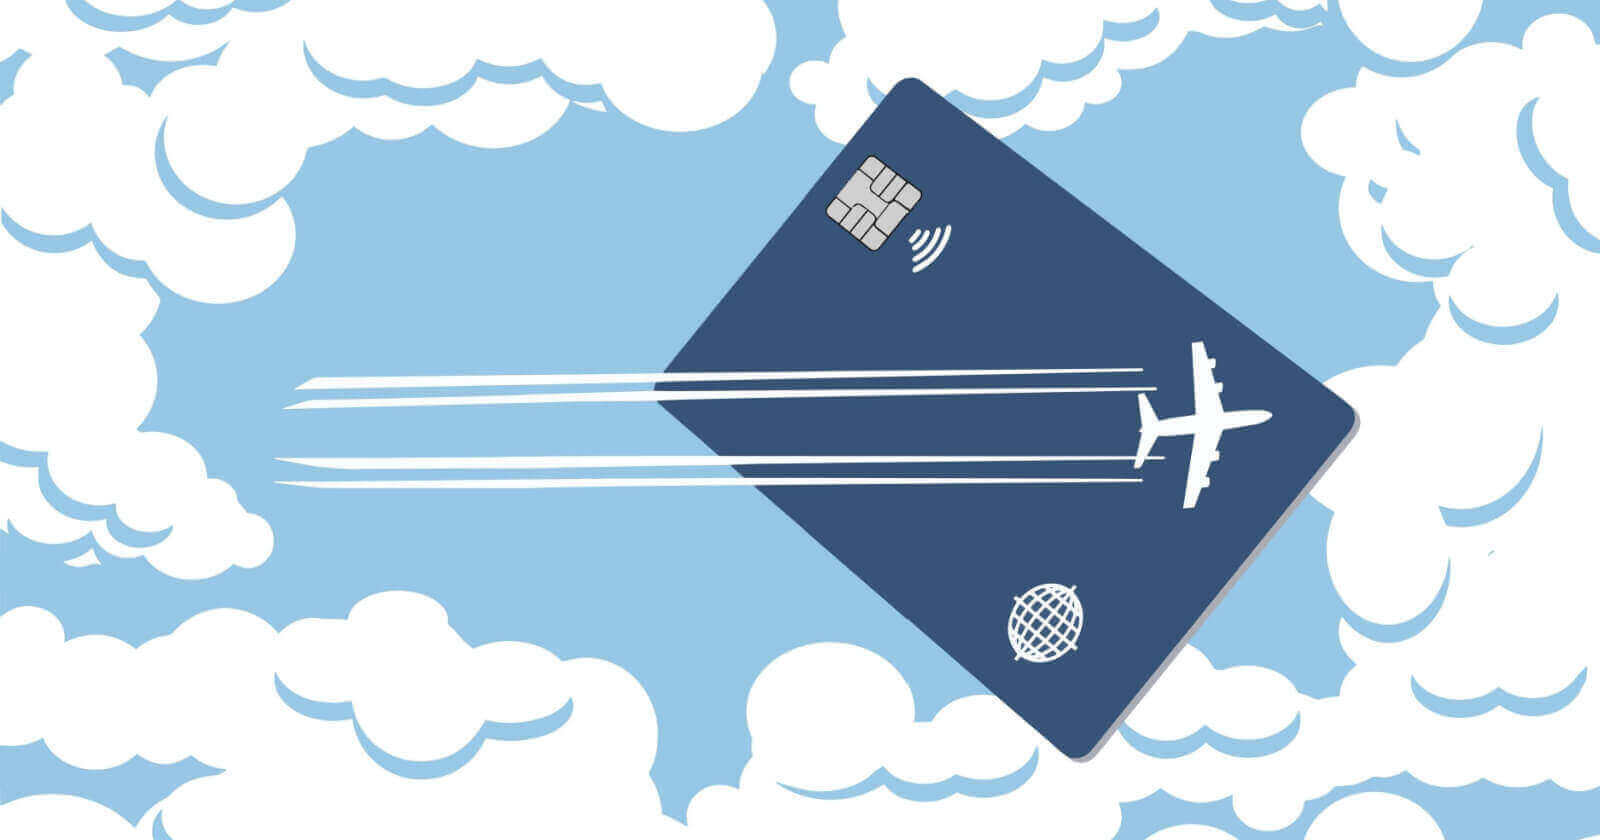 benefits-and-drawbacks-of-frequent-flyer-programs-and-loyalty-schemes